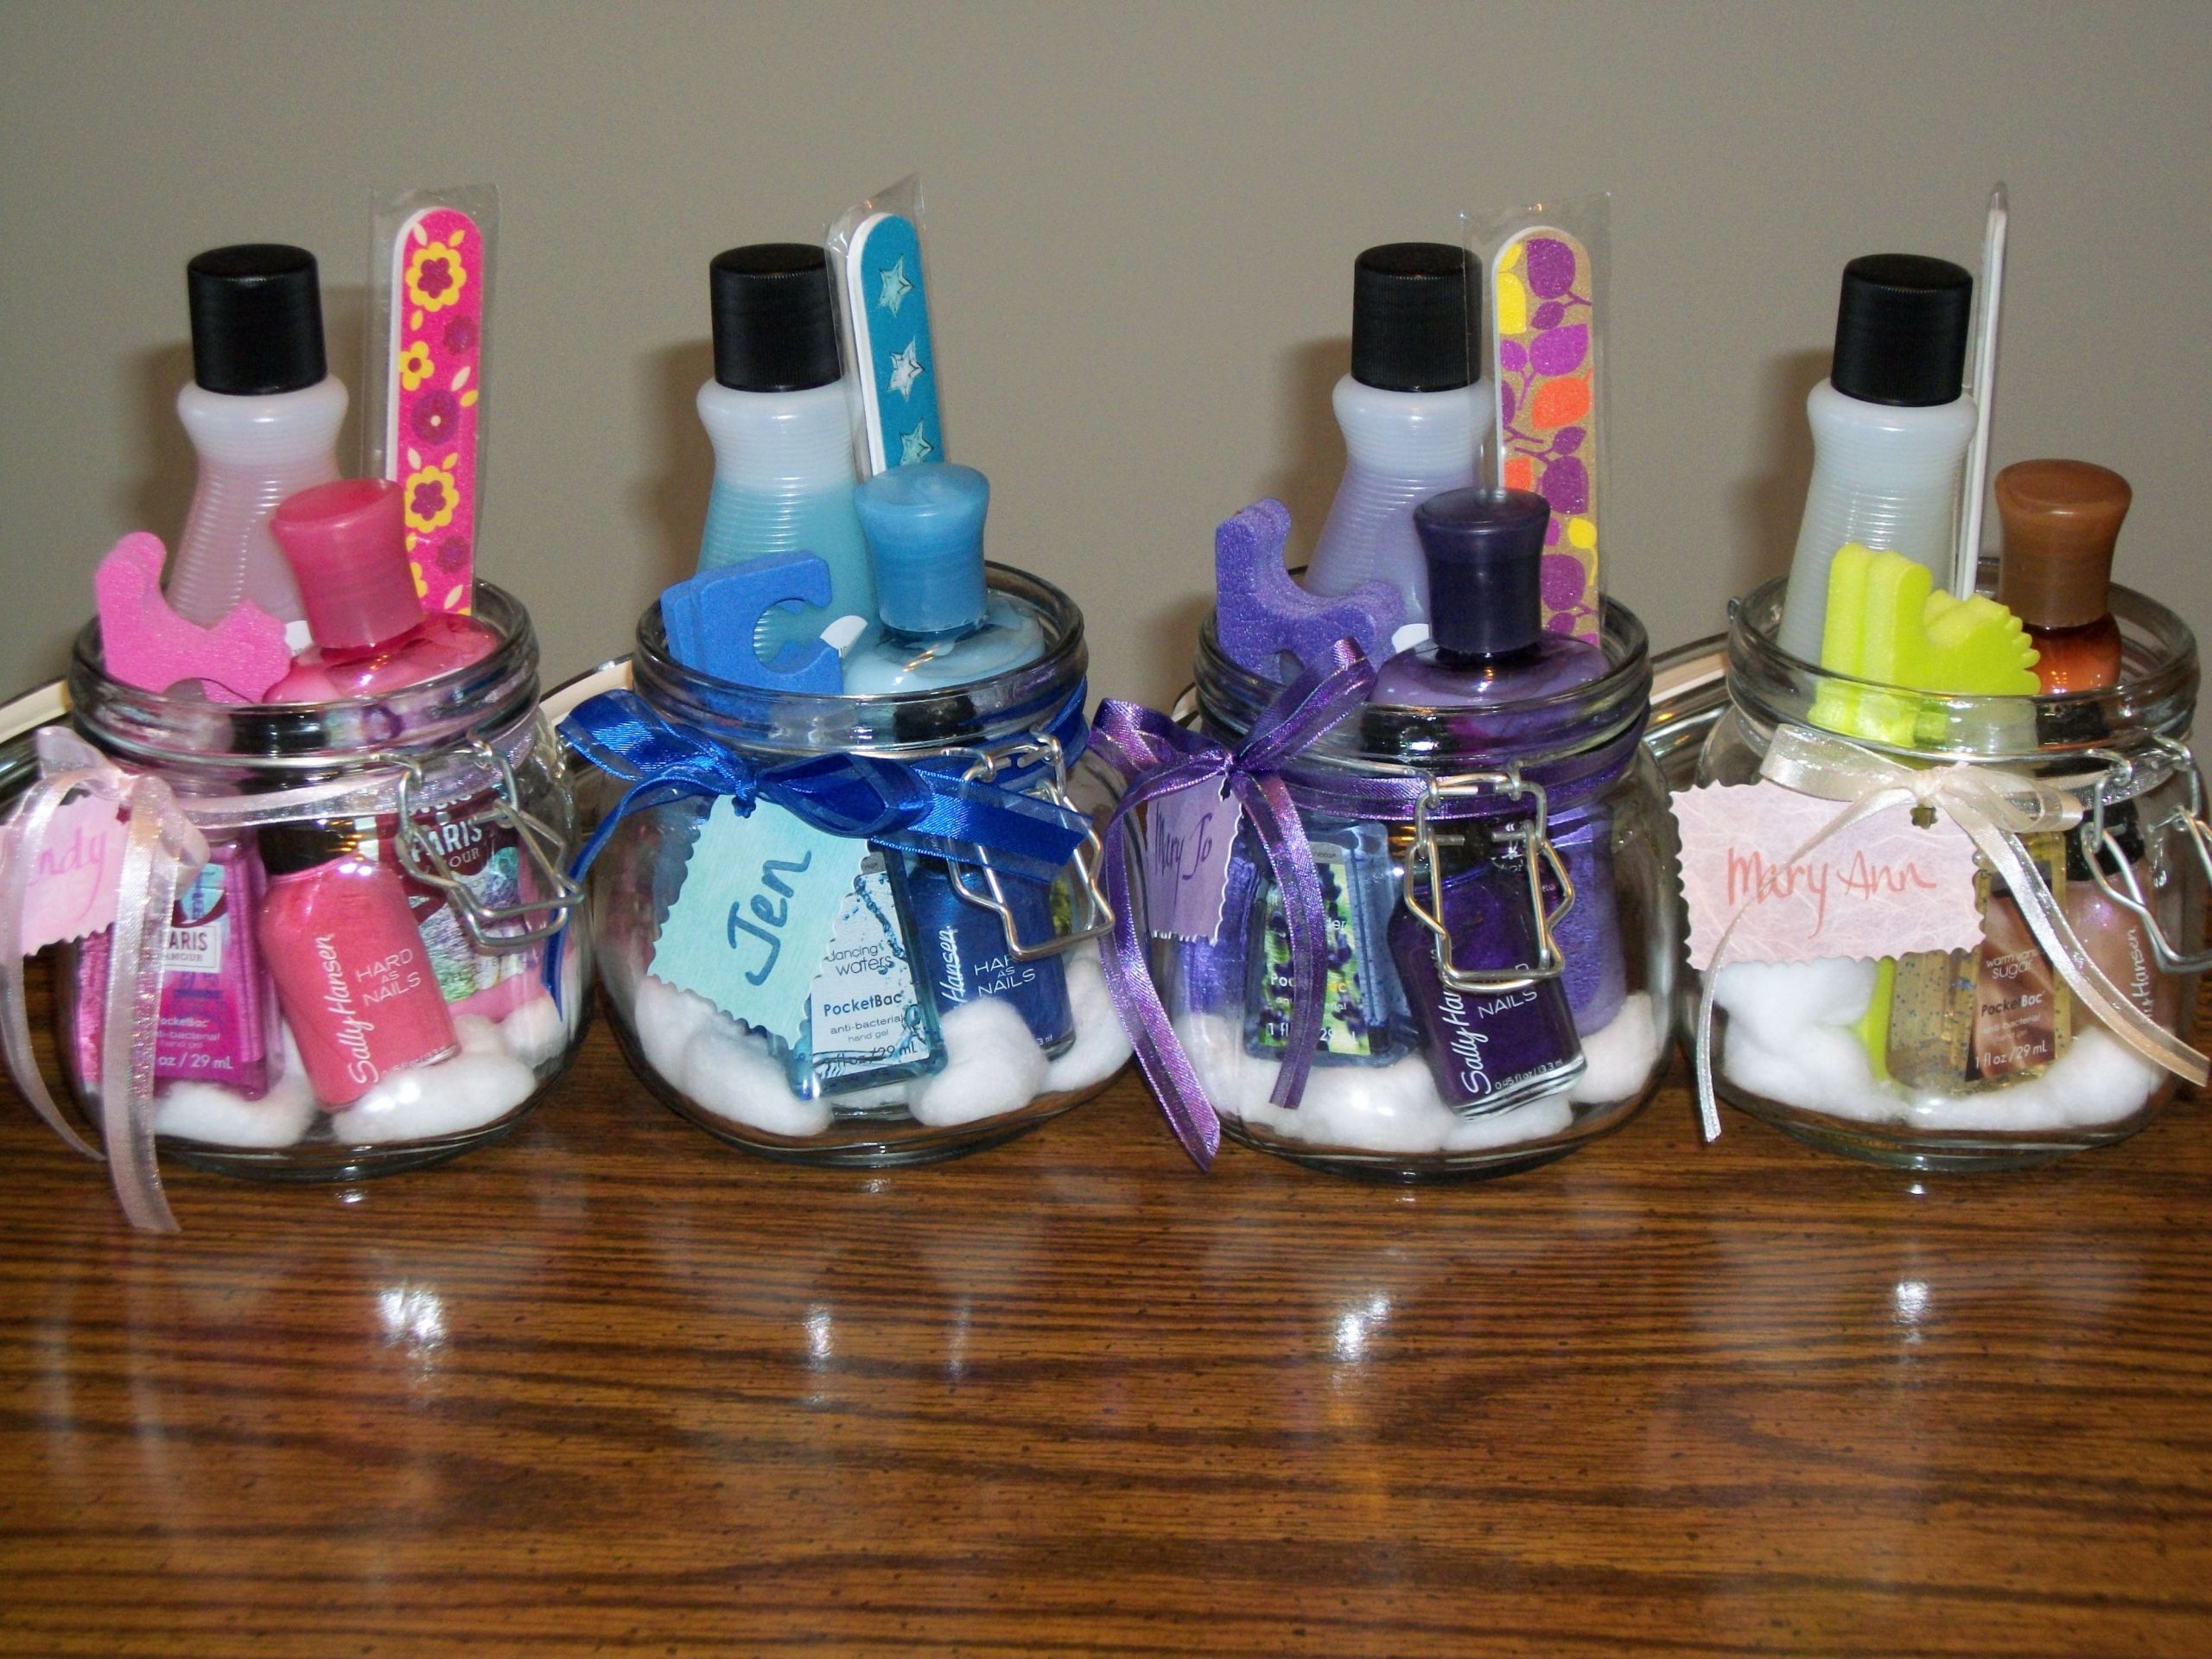 Manicure Gift Basket Ideas
 manicure sets great t & not too expensive to make